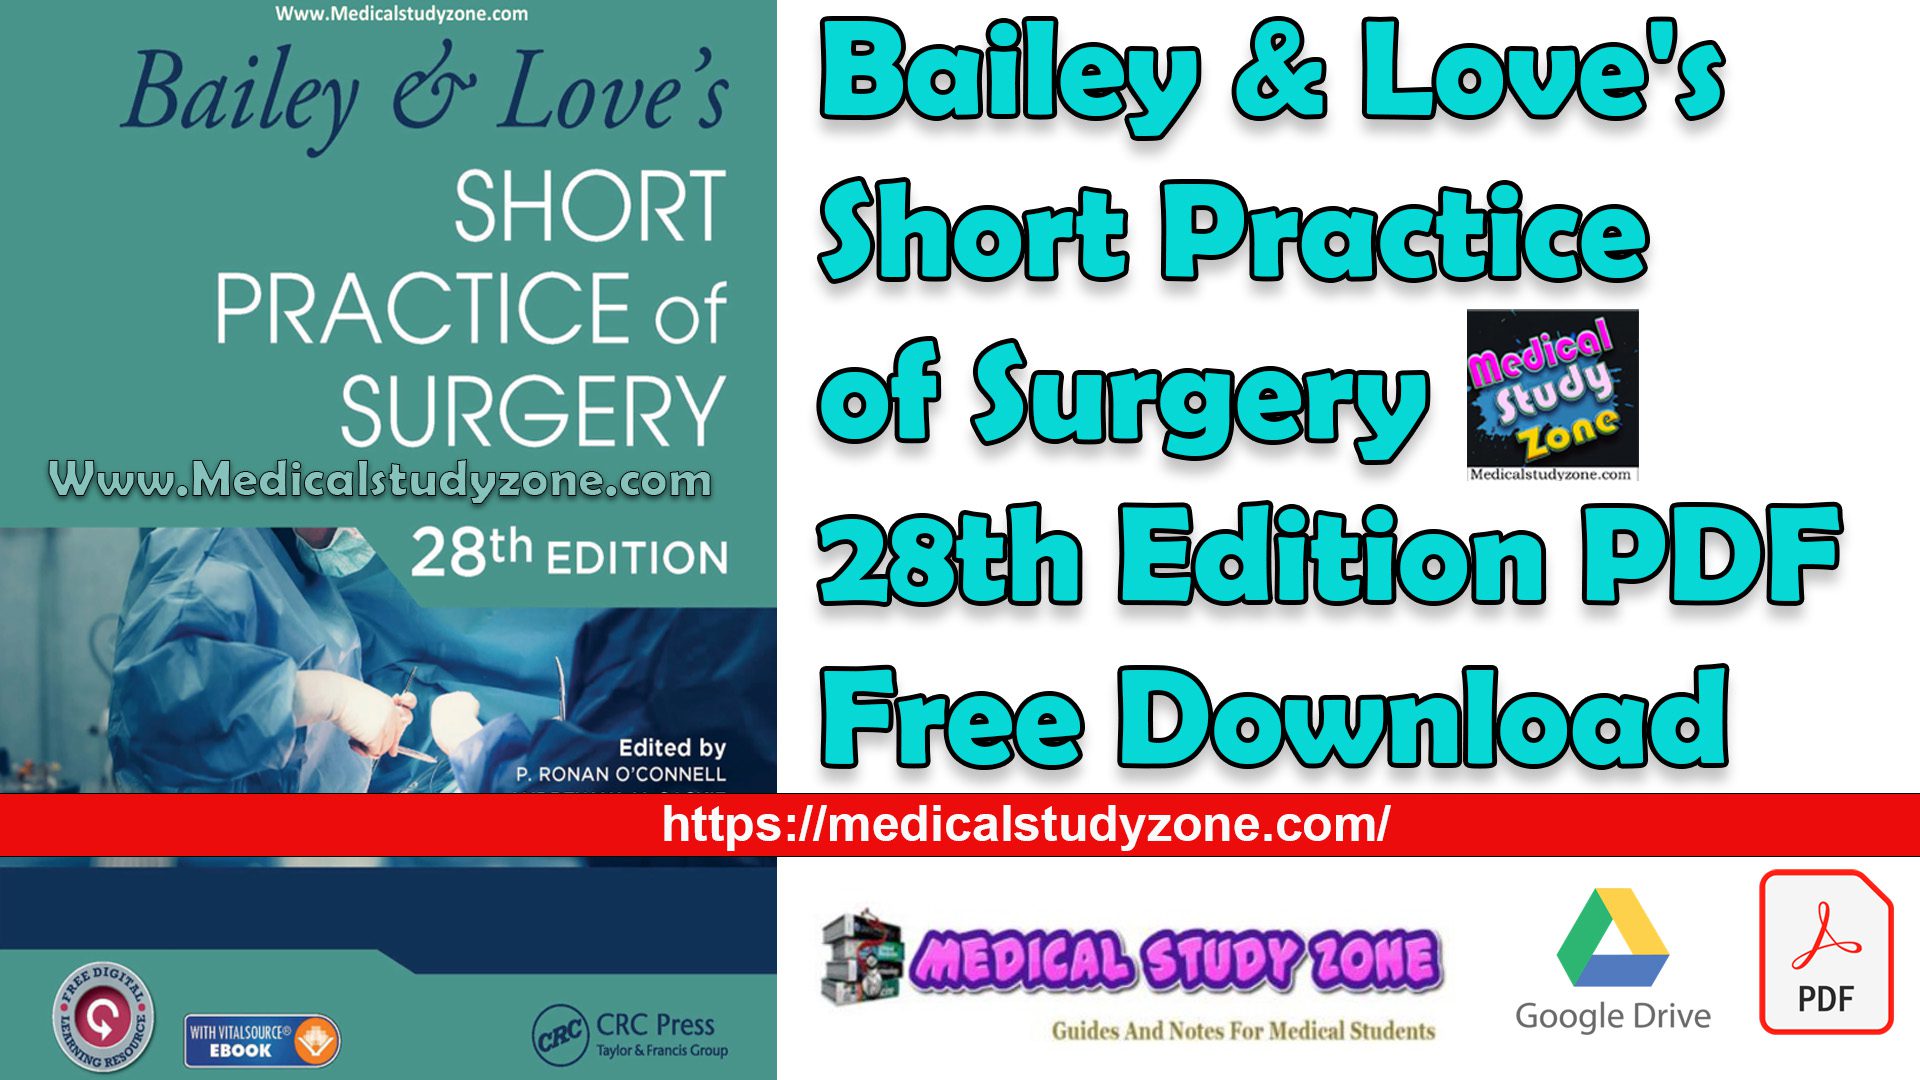 Bailey & Love's Short Practice of Surgery 28th Edition PDF Free Download